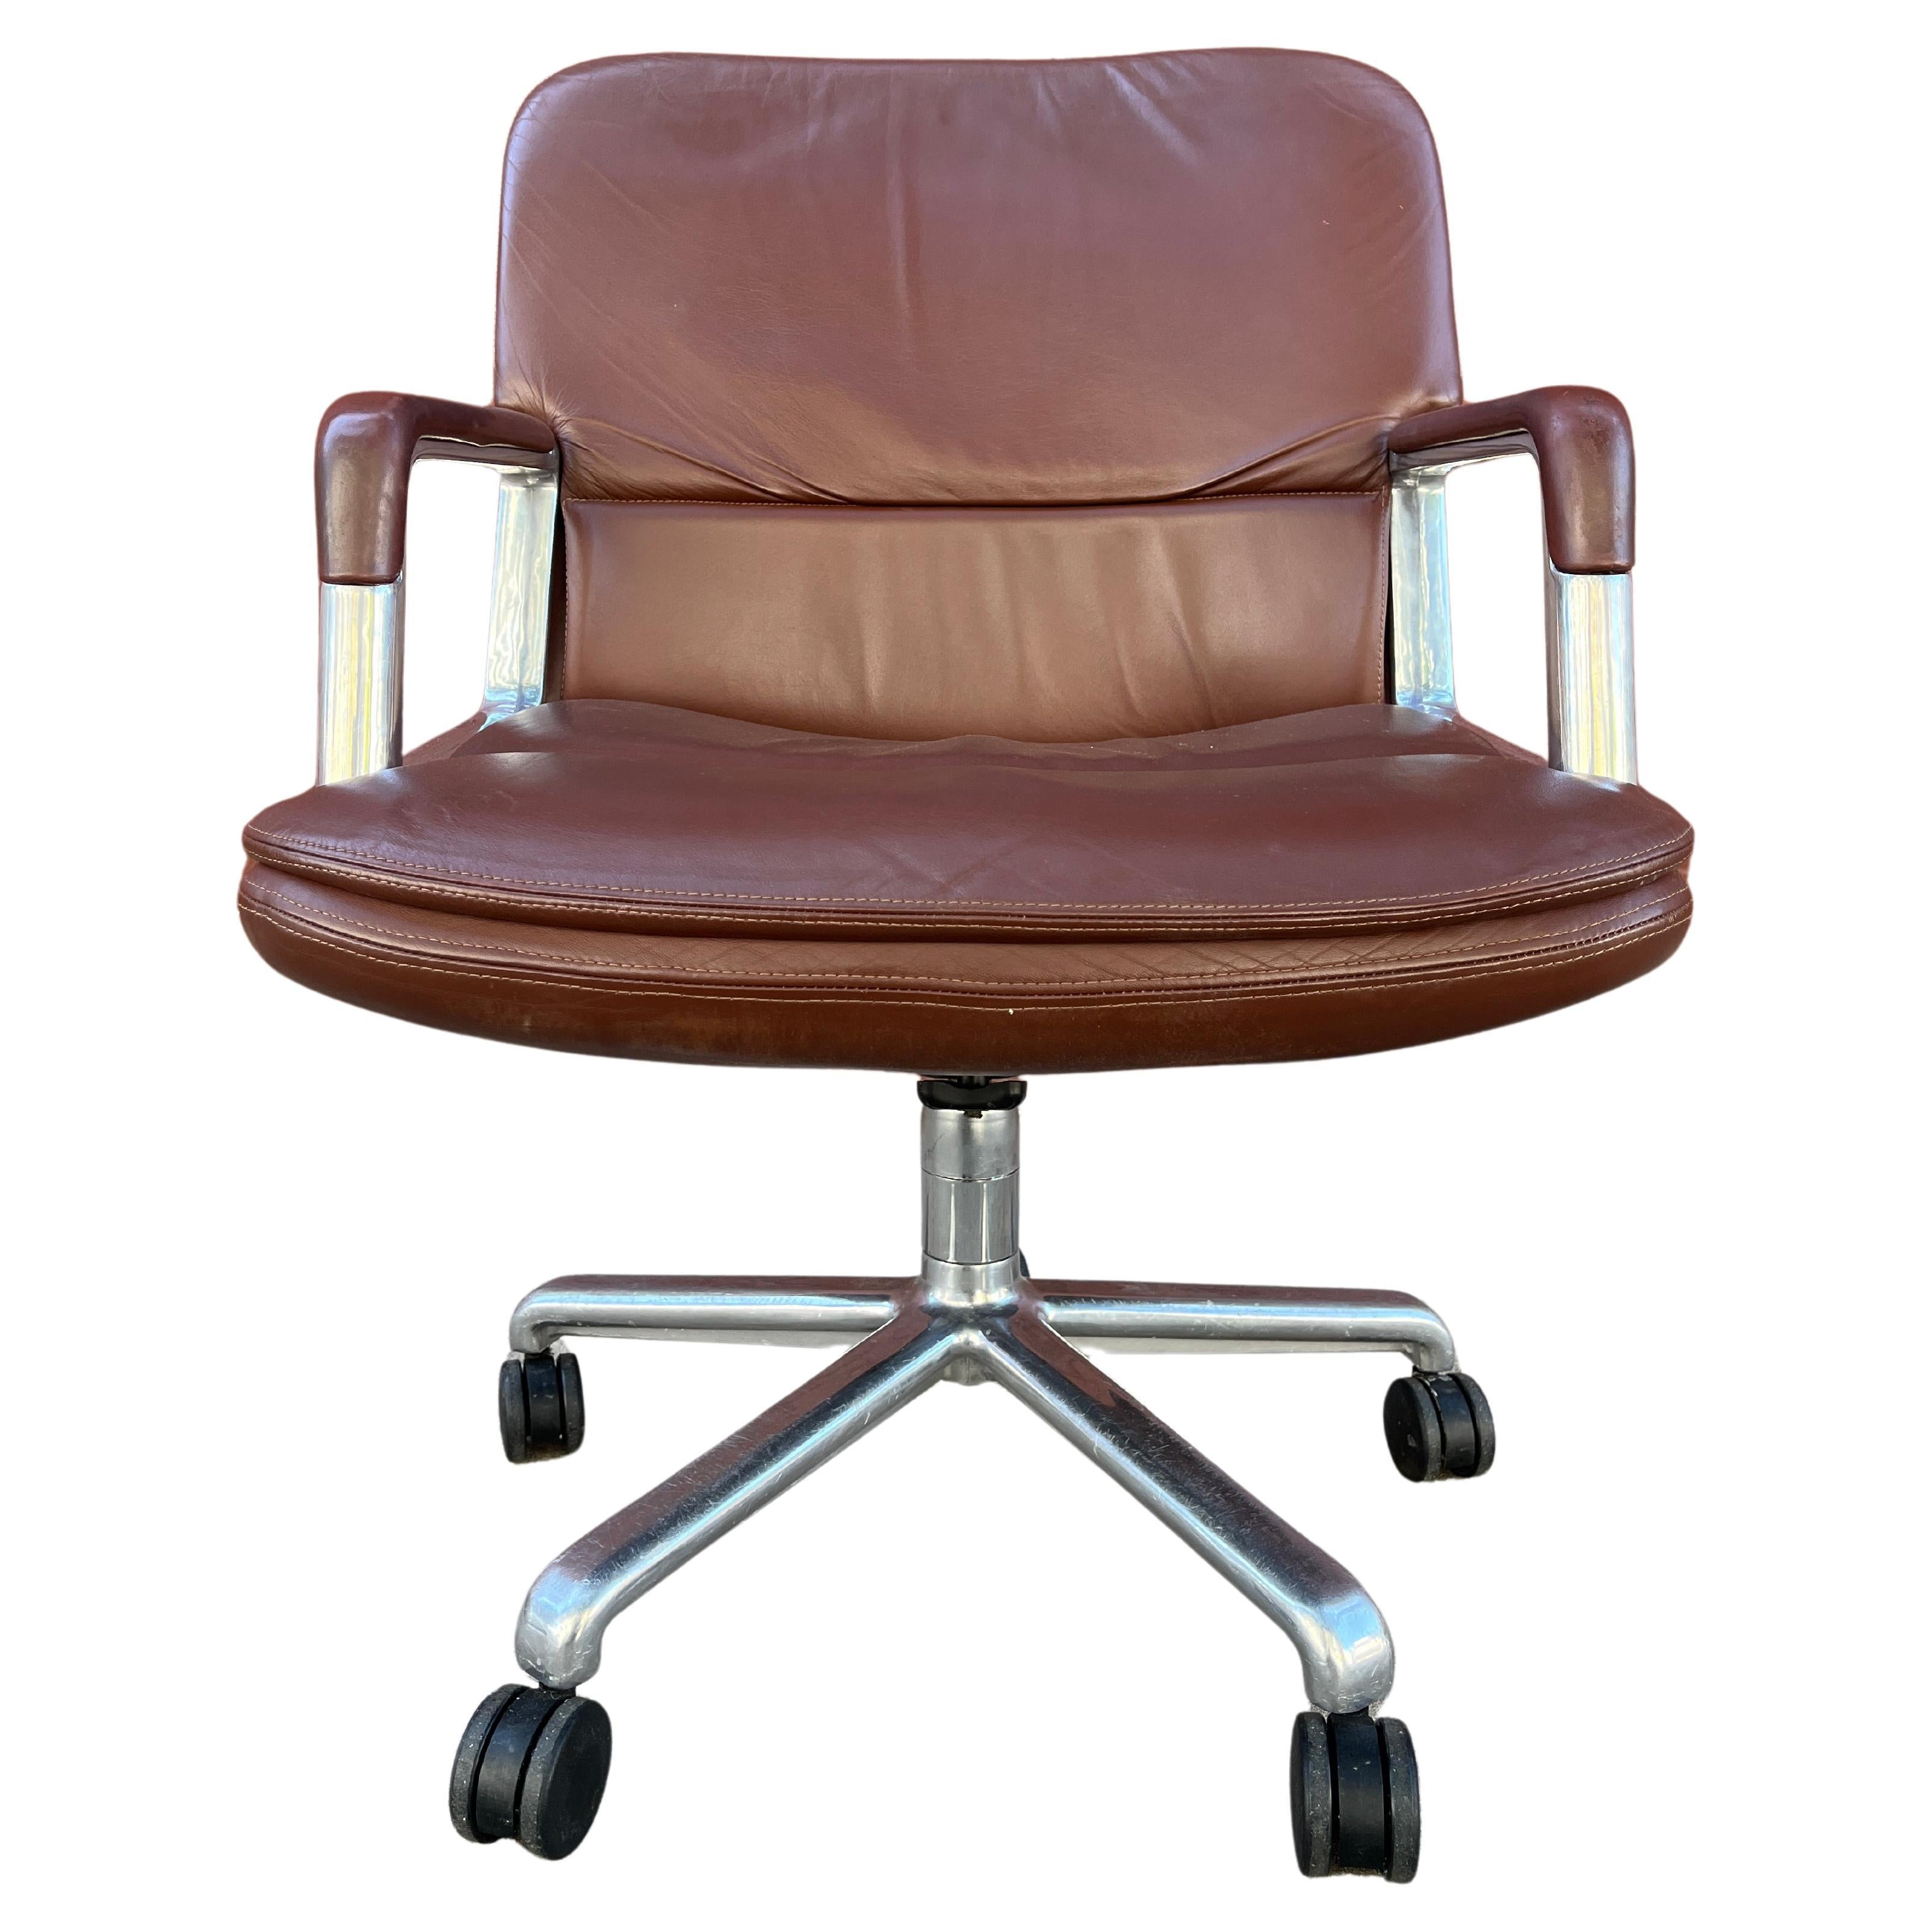 Premium leather with beautiful stitching wrapped around aluminum frame. Unique brown leather chairs for home or office. Adjustable height and tilt. Arm height 24.75 lowest position